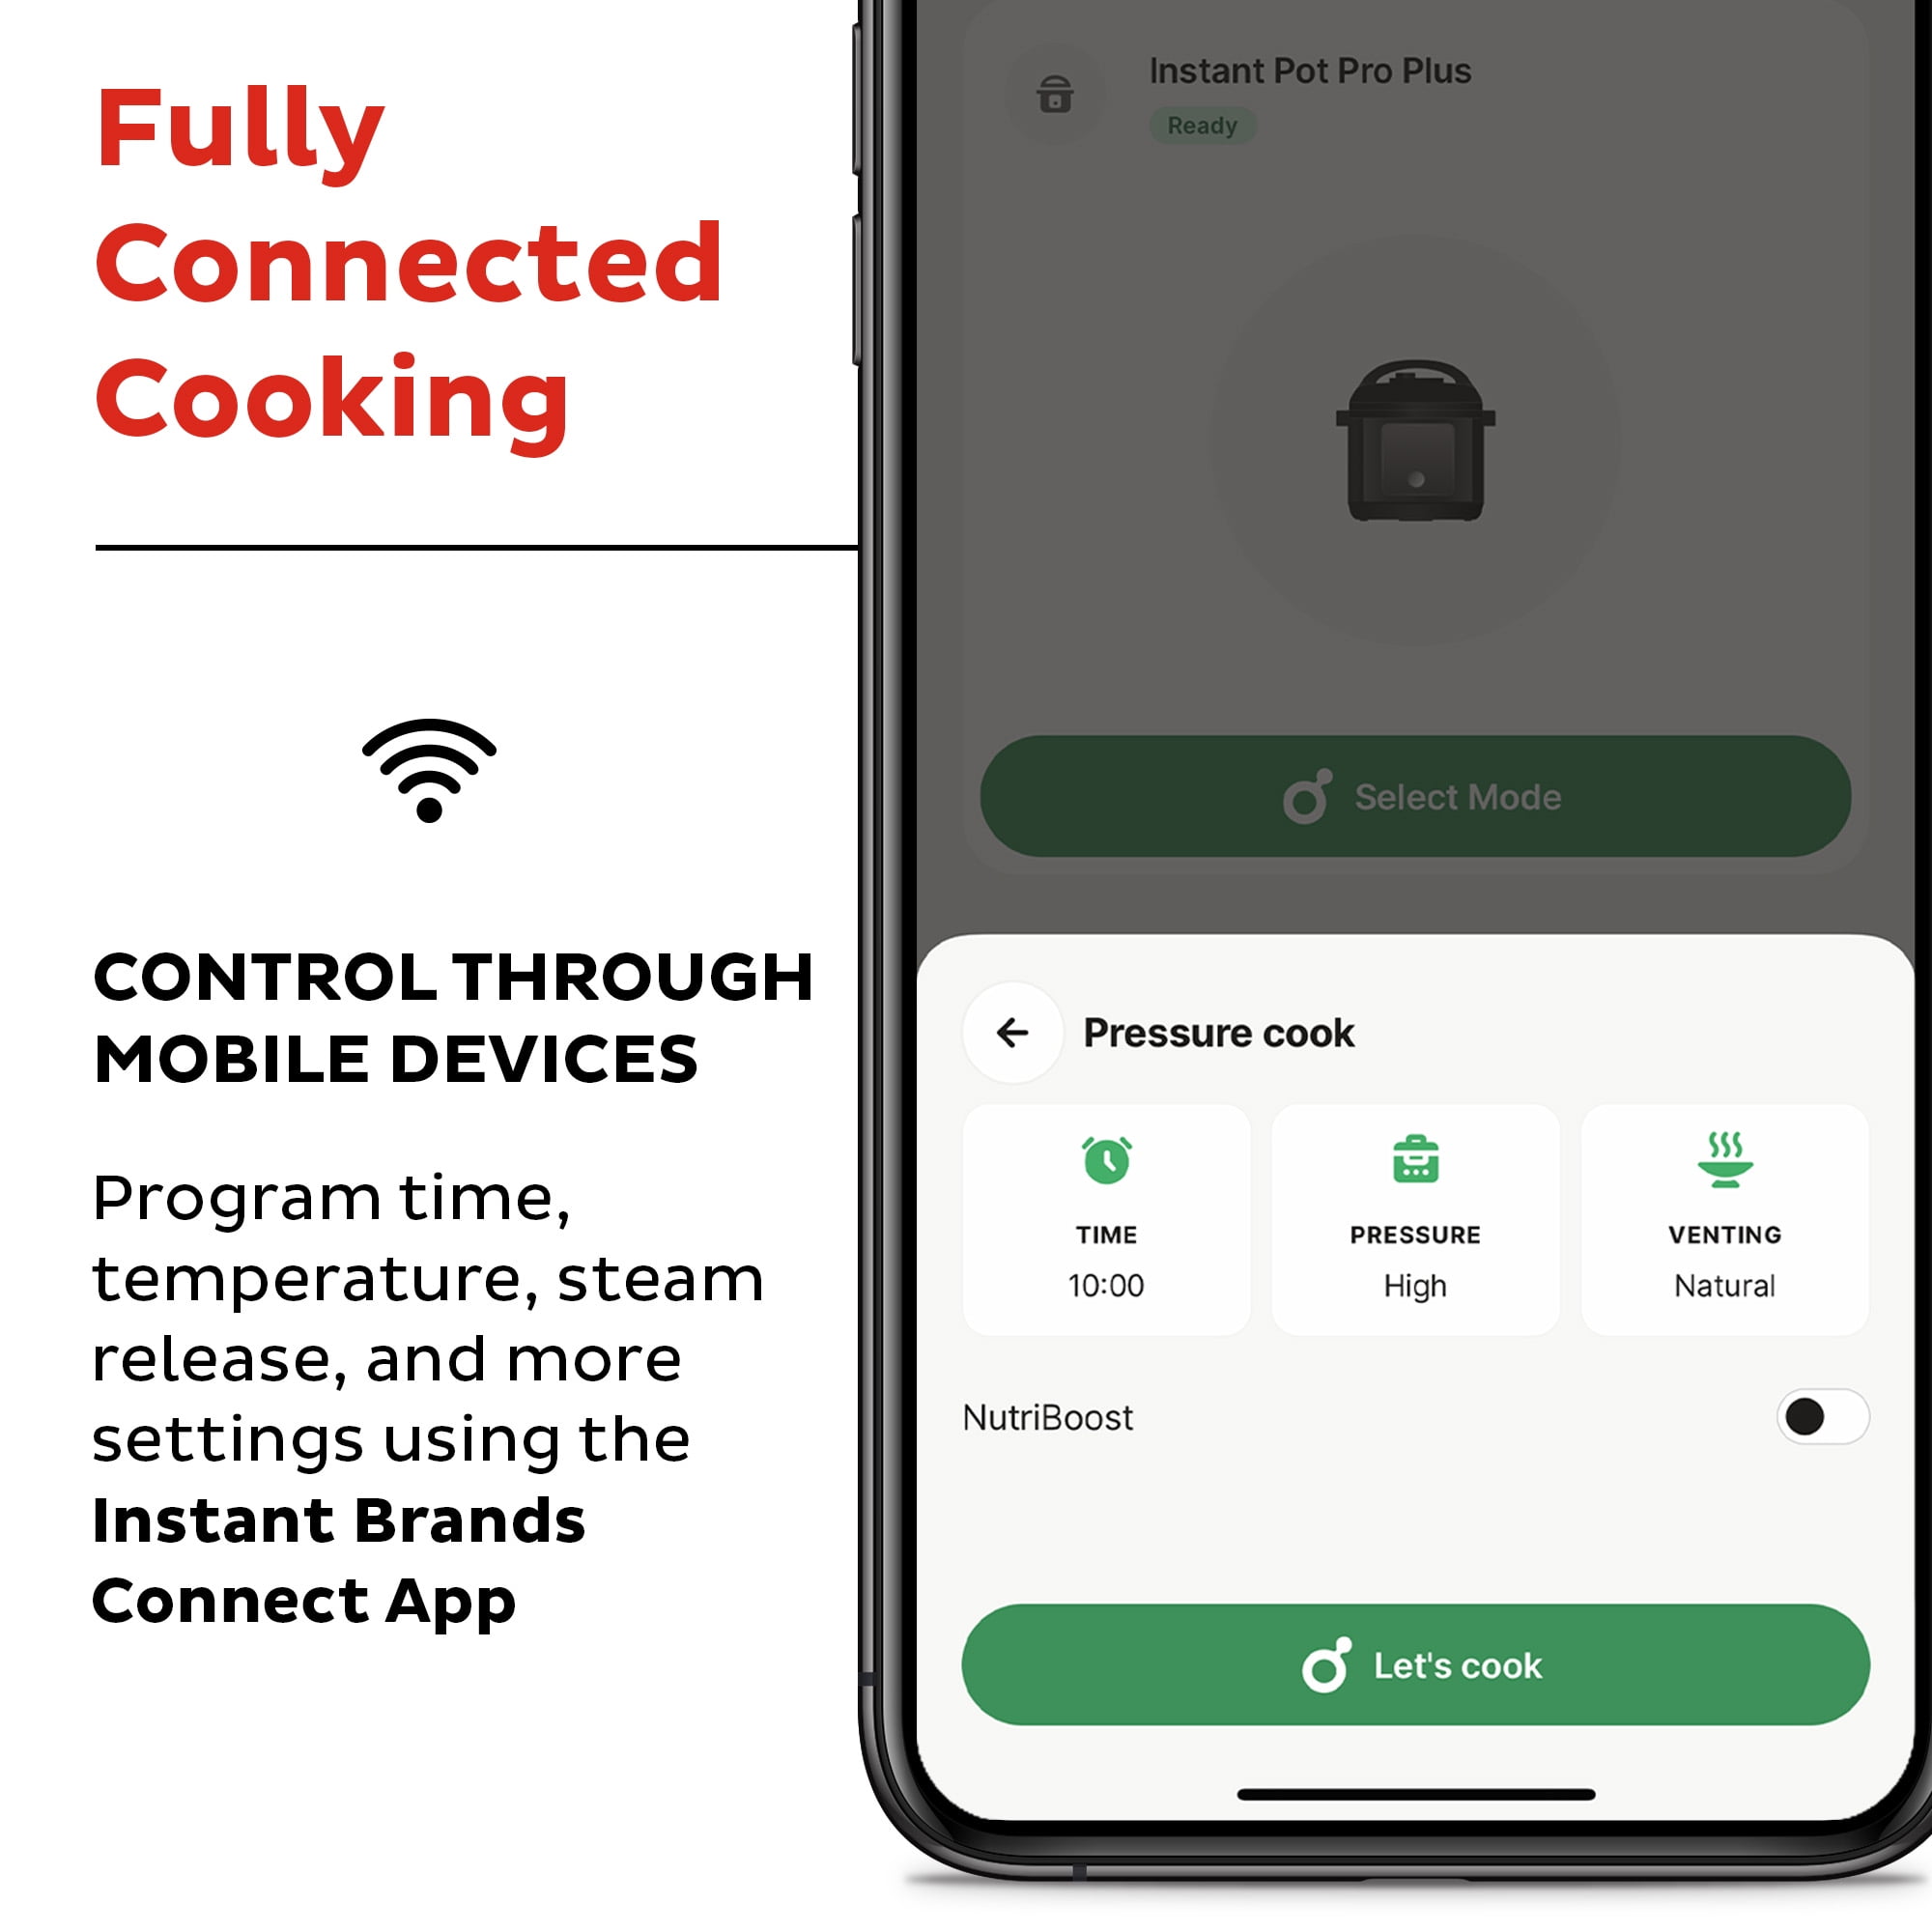 New Instant Pot Smart Wifi Preorder